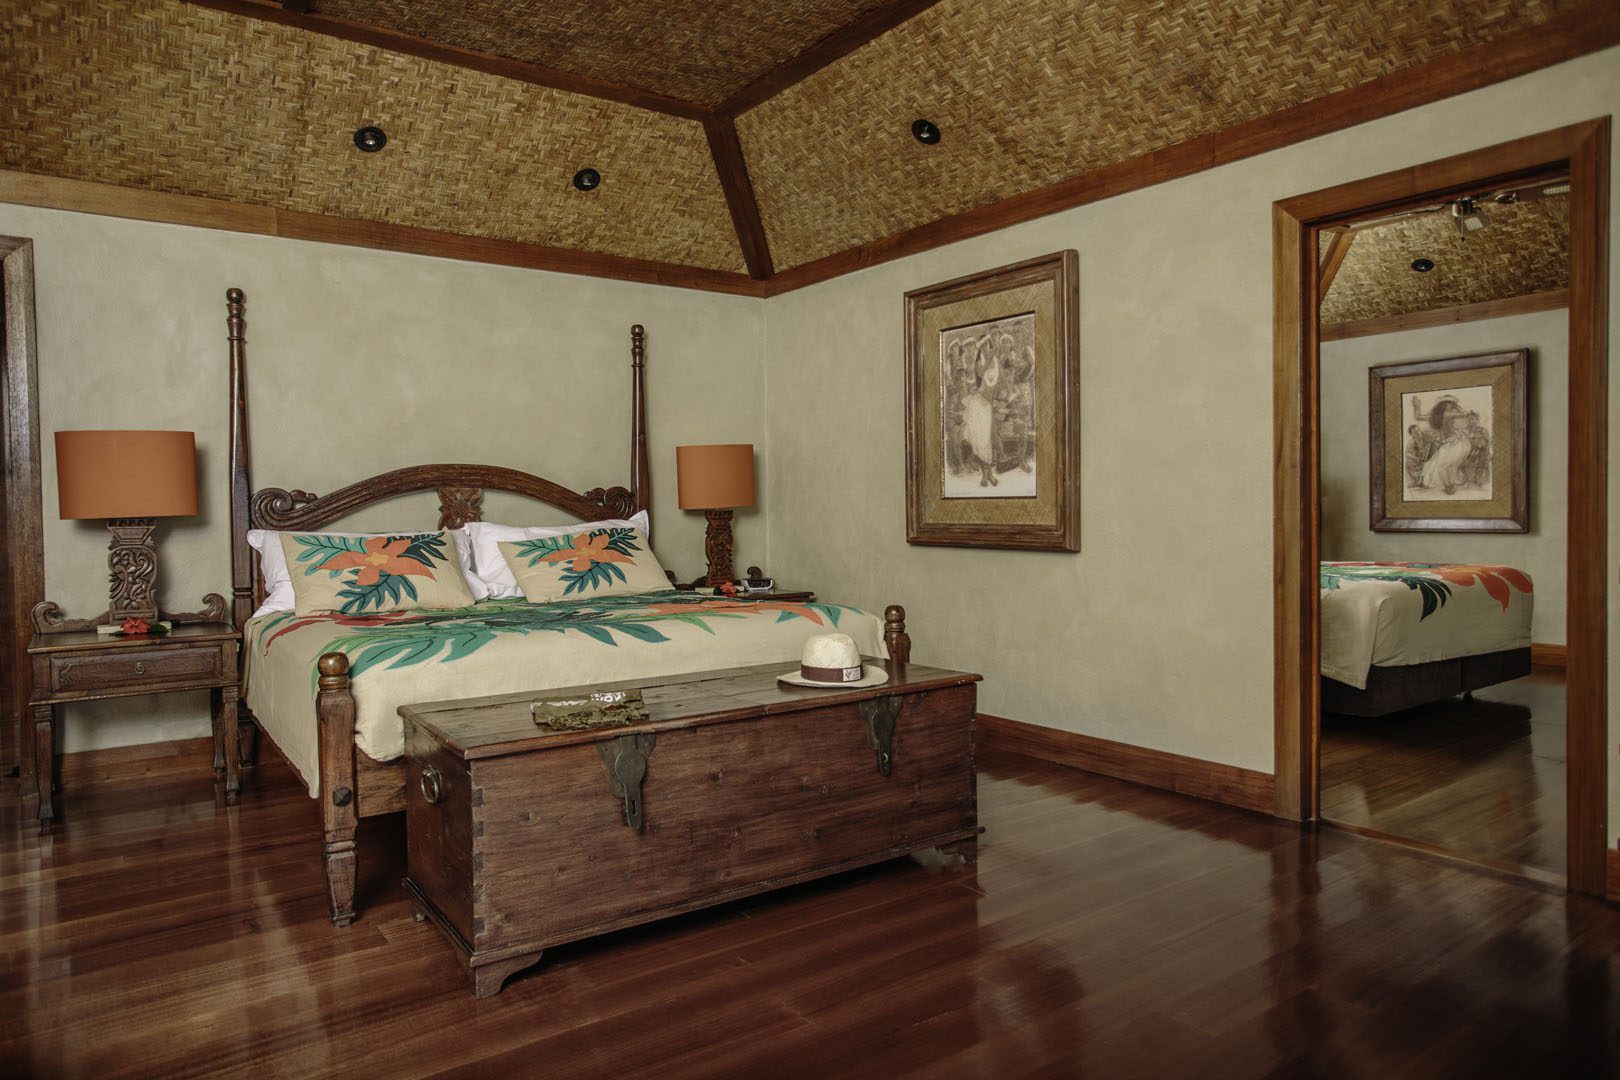 A beautiful view of the Premium Beachfront Bungalow one-bedroom featuring the various art designs on the head-bed, lamps and pictures on the wall